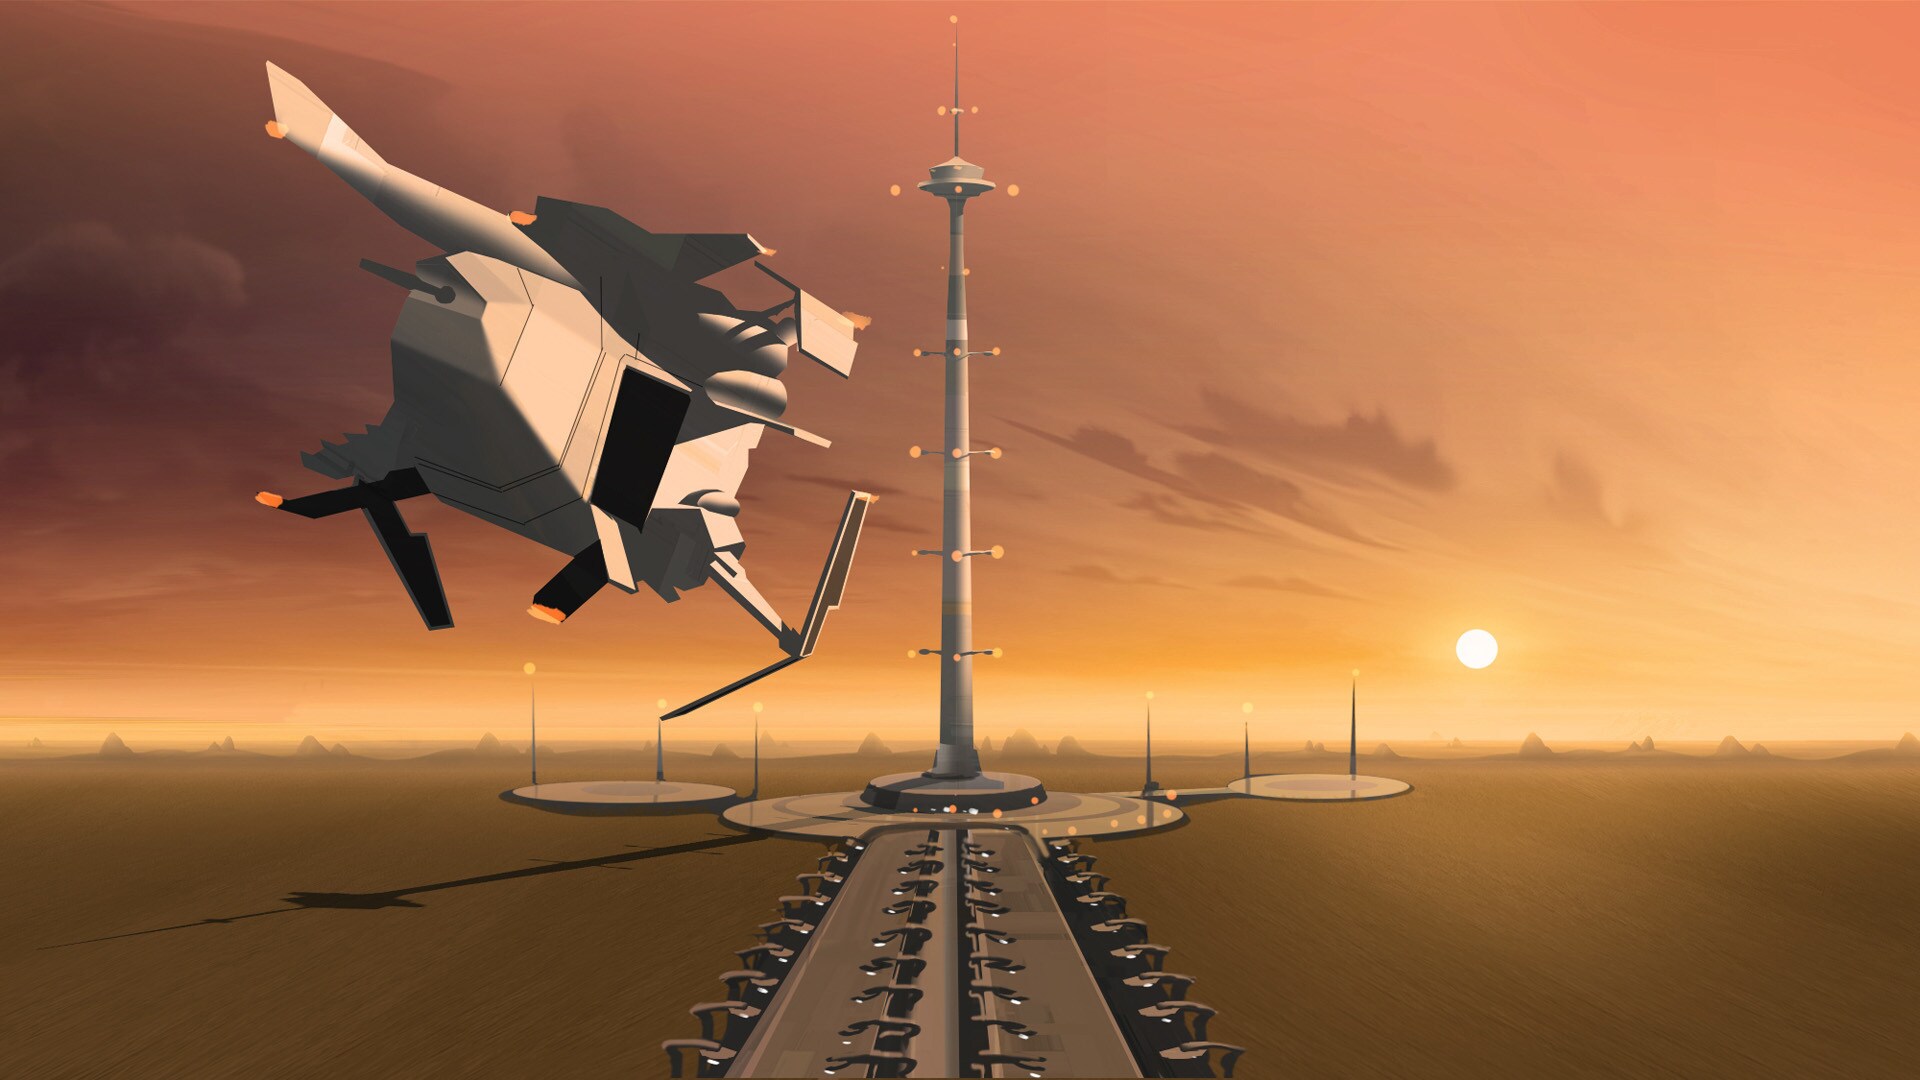 Imperial Patrol Transport and communication tower concept painting.